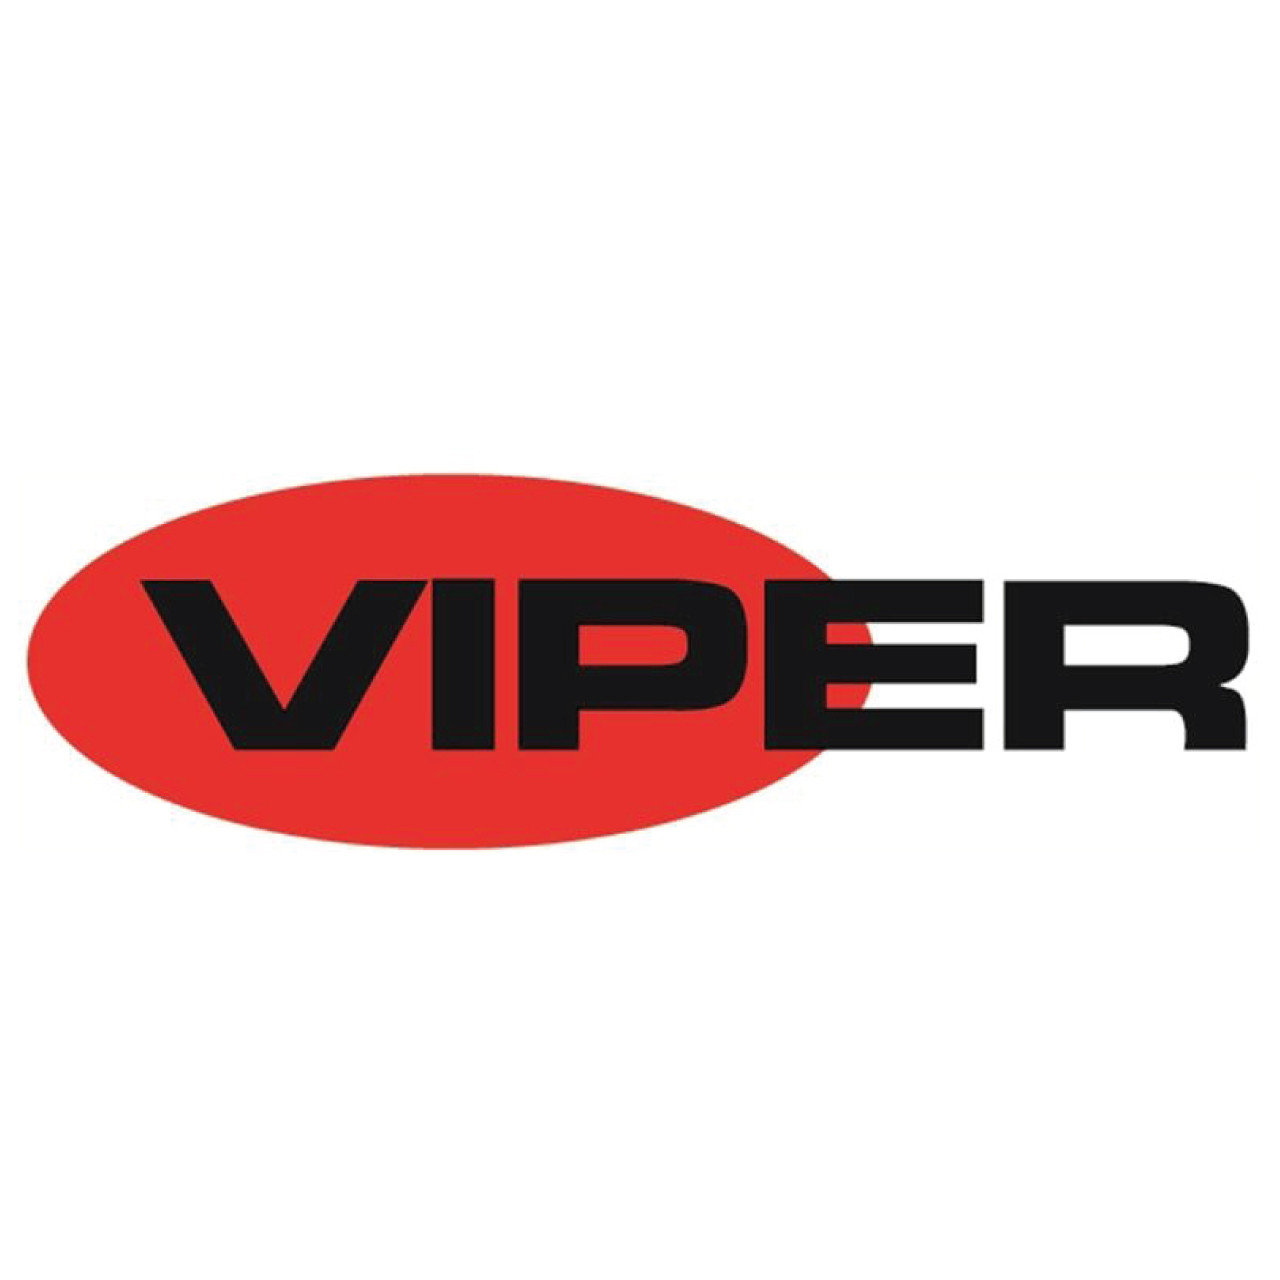 VIPER EQUIPMENT PART # 4089100507 KIT HANDLE VHW4_1 SS PICTURE